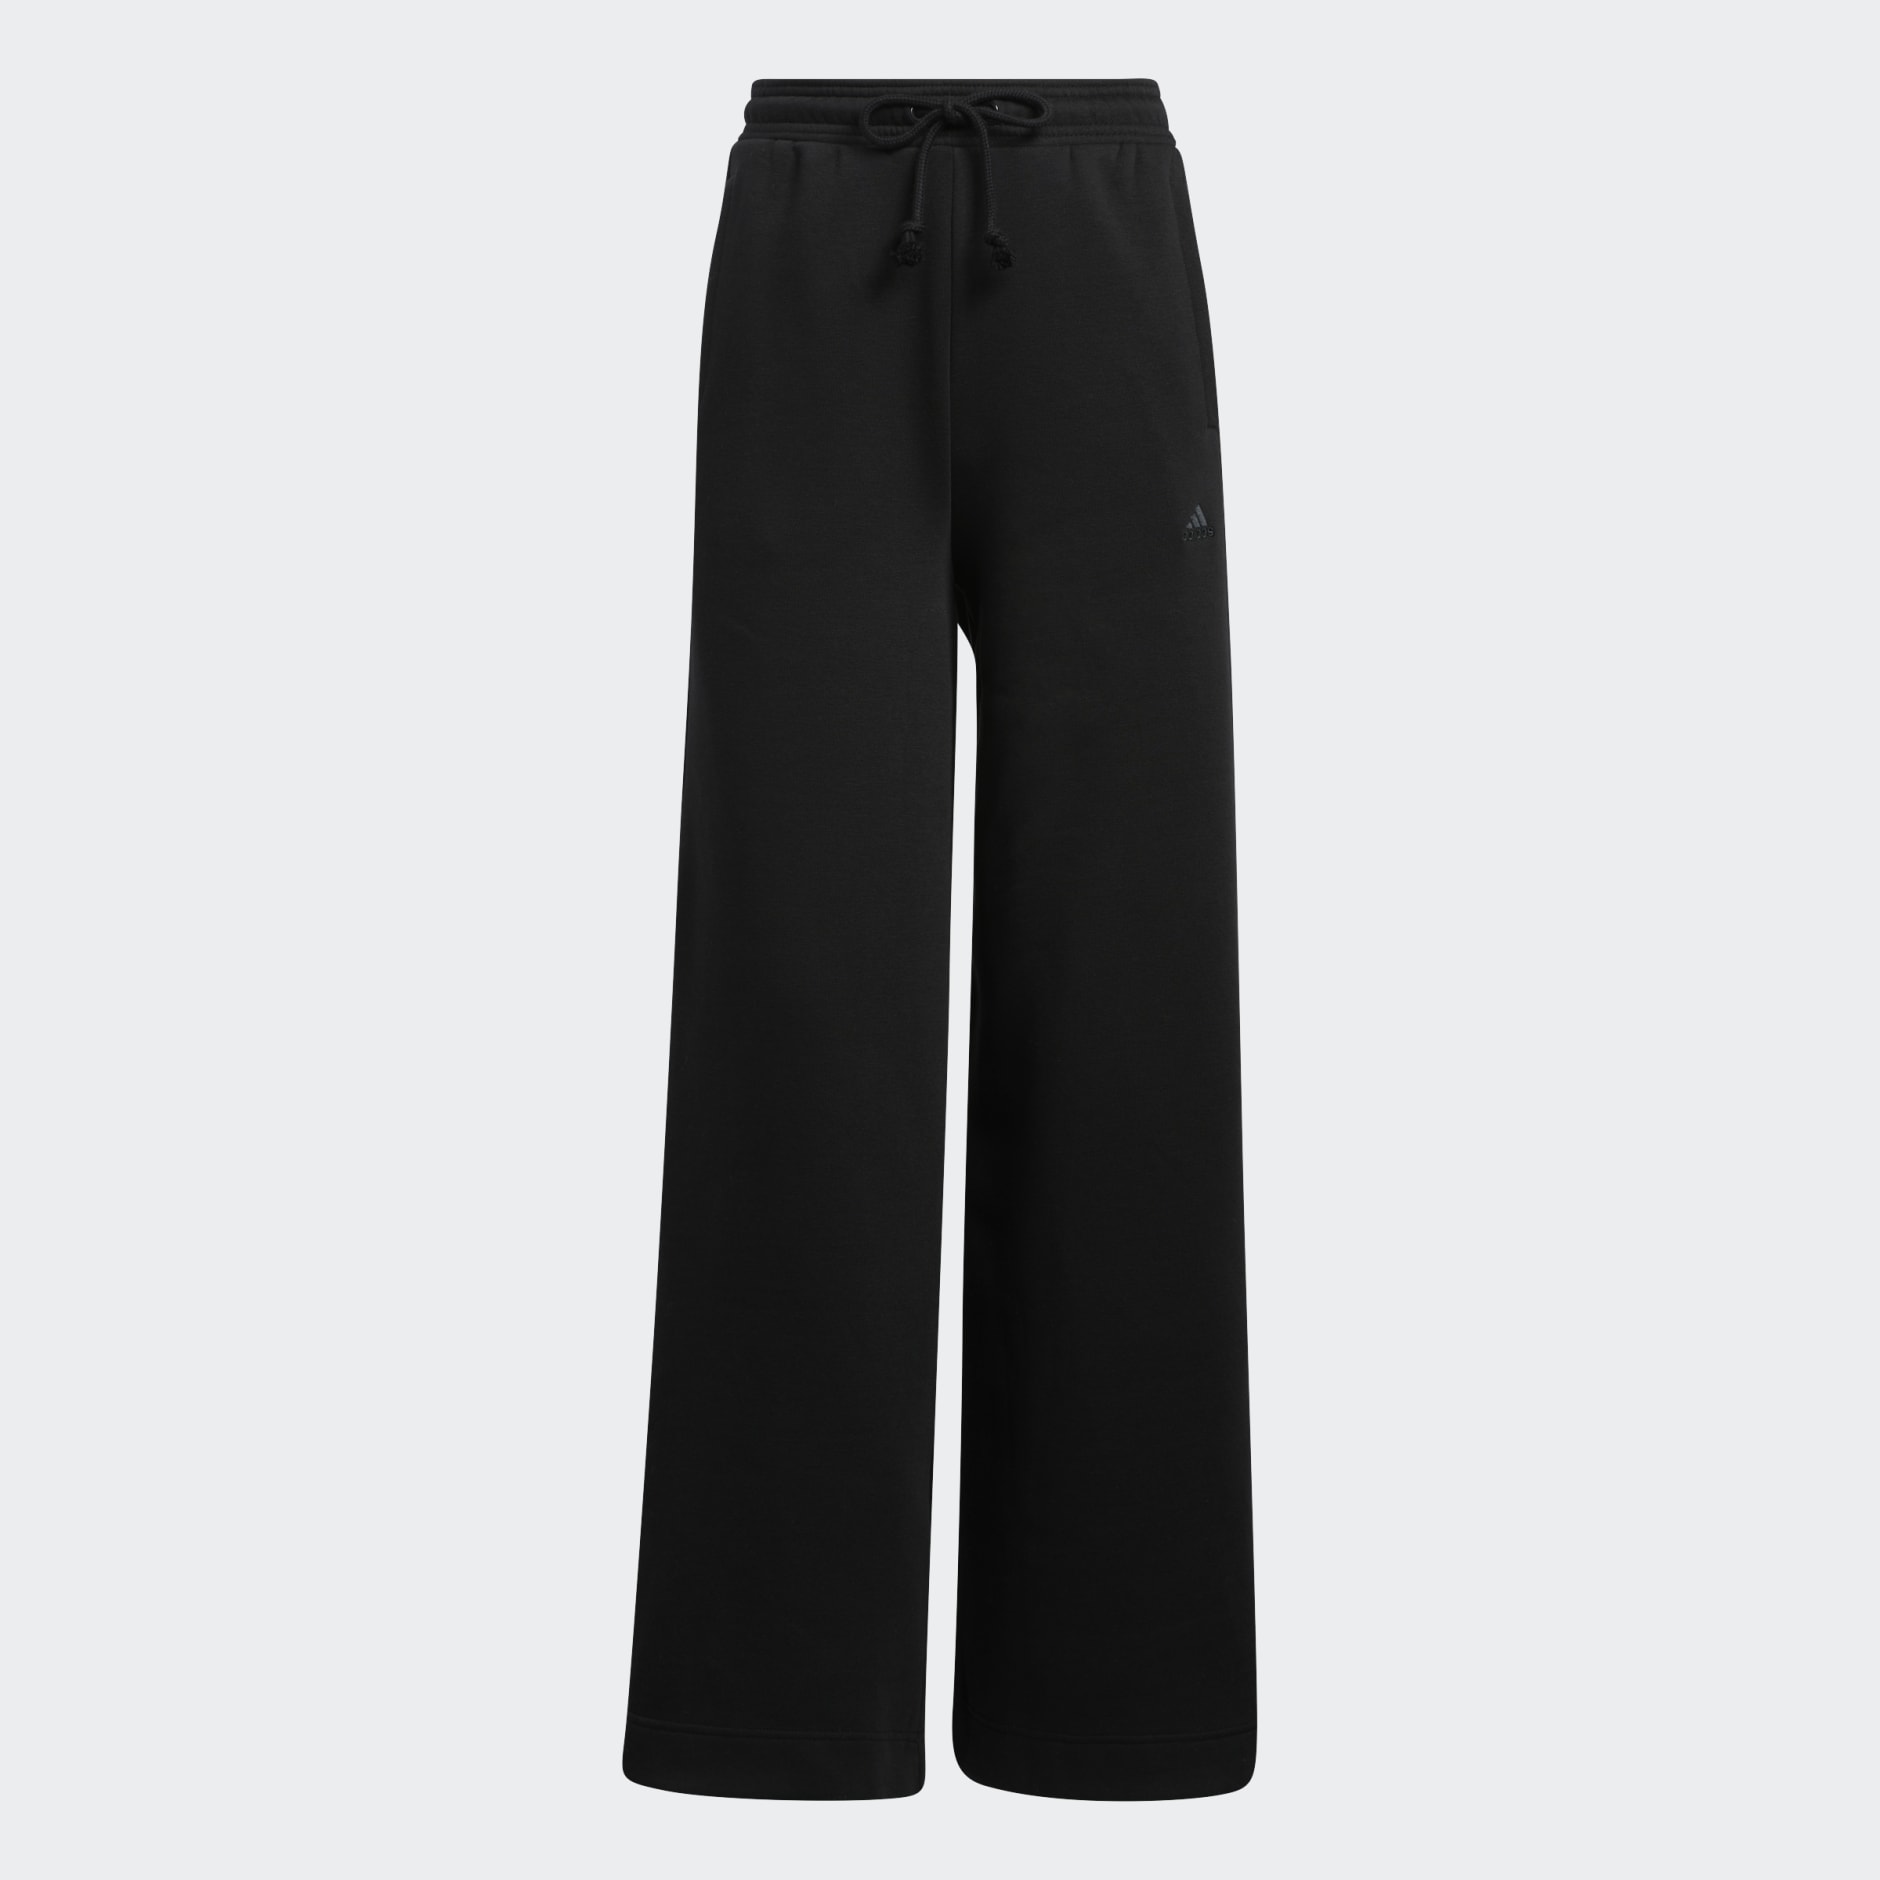  adidas Women's All SZN Fleece Wide Pants, Black, X-Small :  Clothing, Shoes & Jewelry